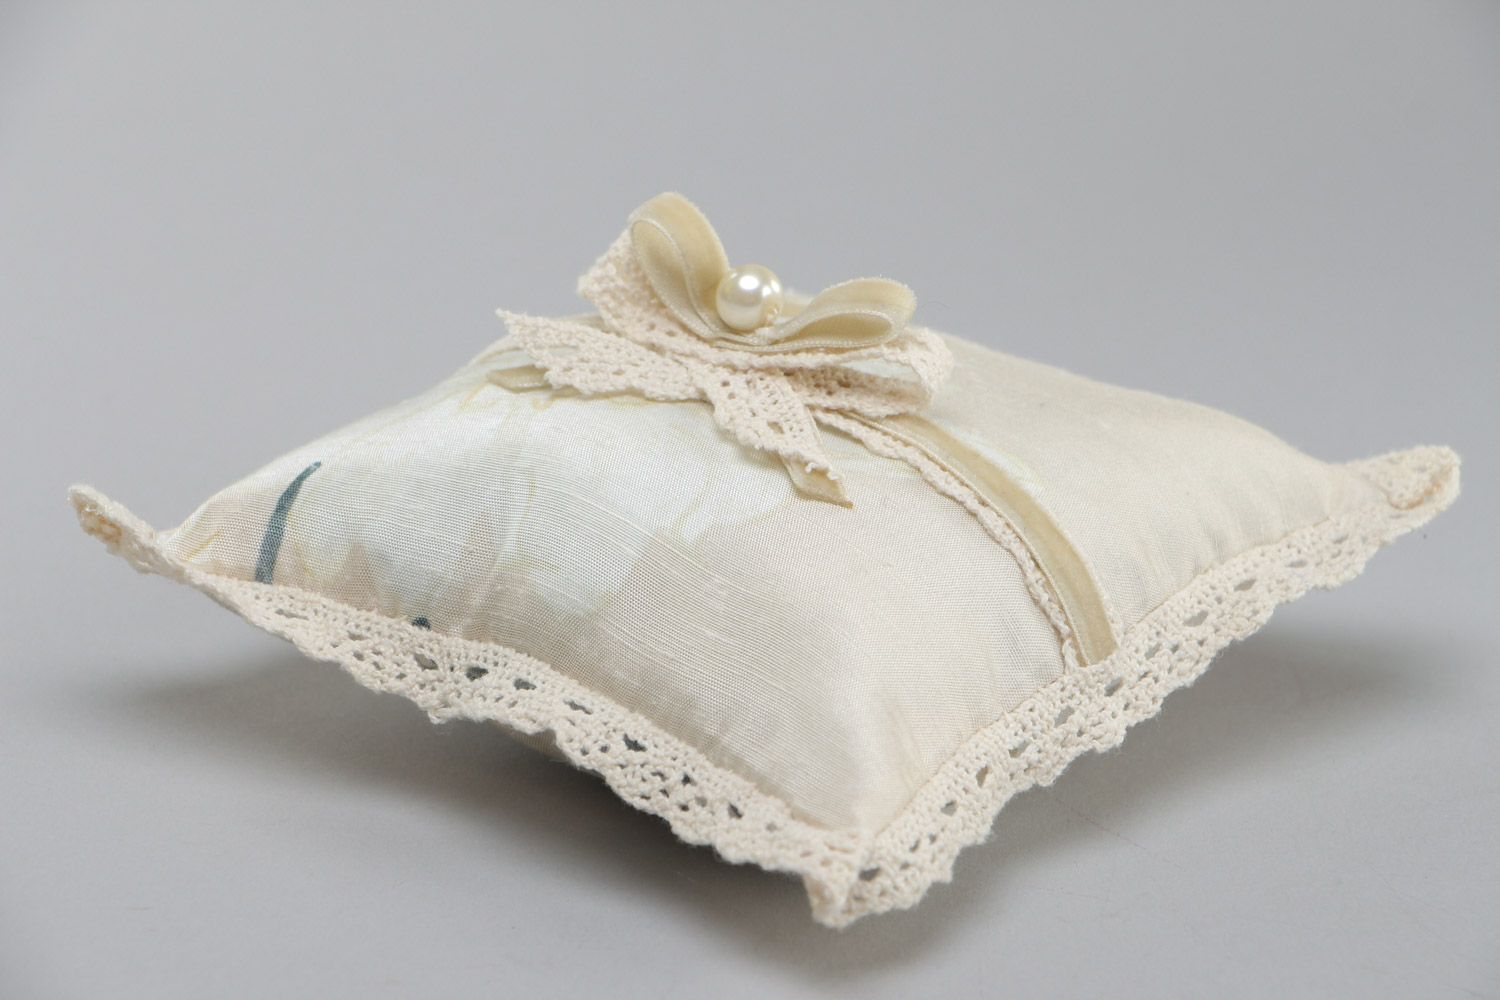 Handmade wedding ring bearer pillow sewn of ivory-colored silk fabric with bow photo 3